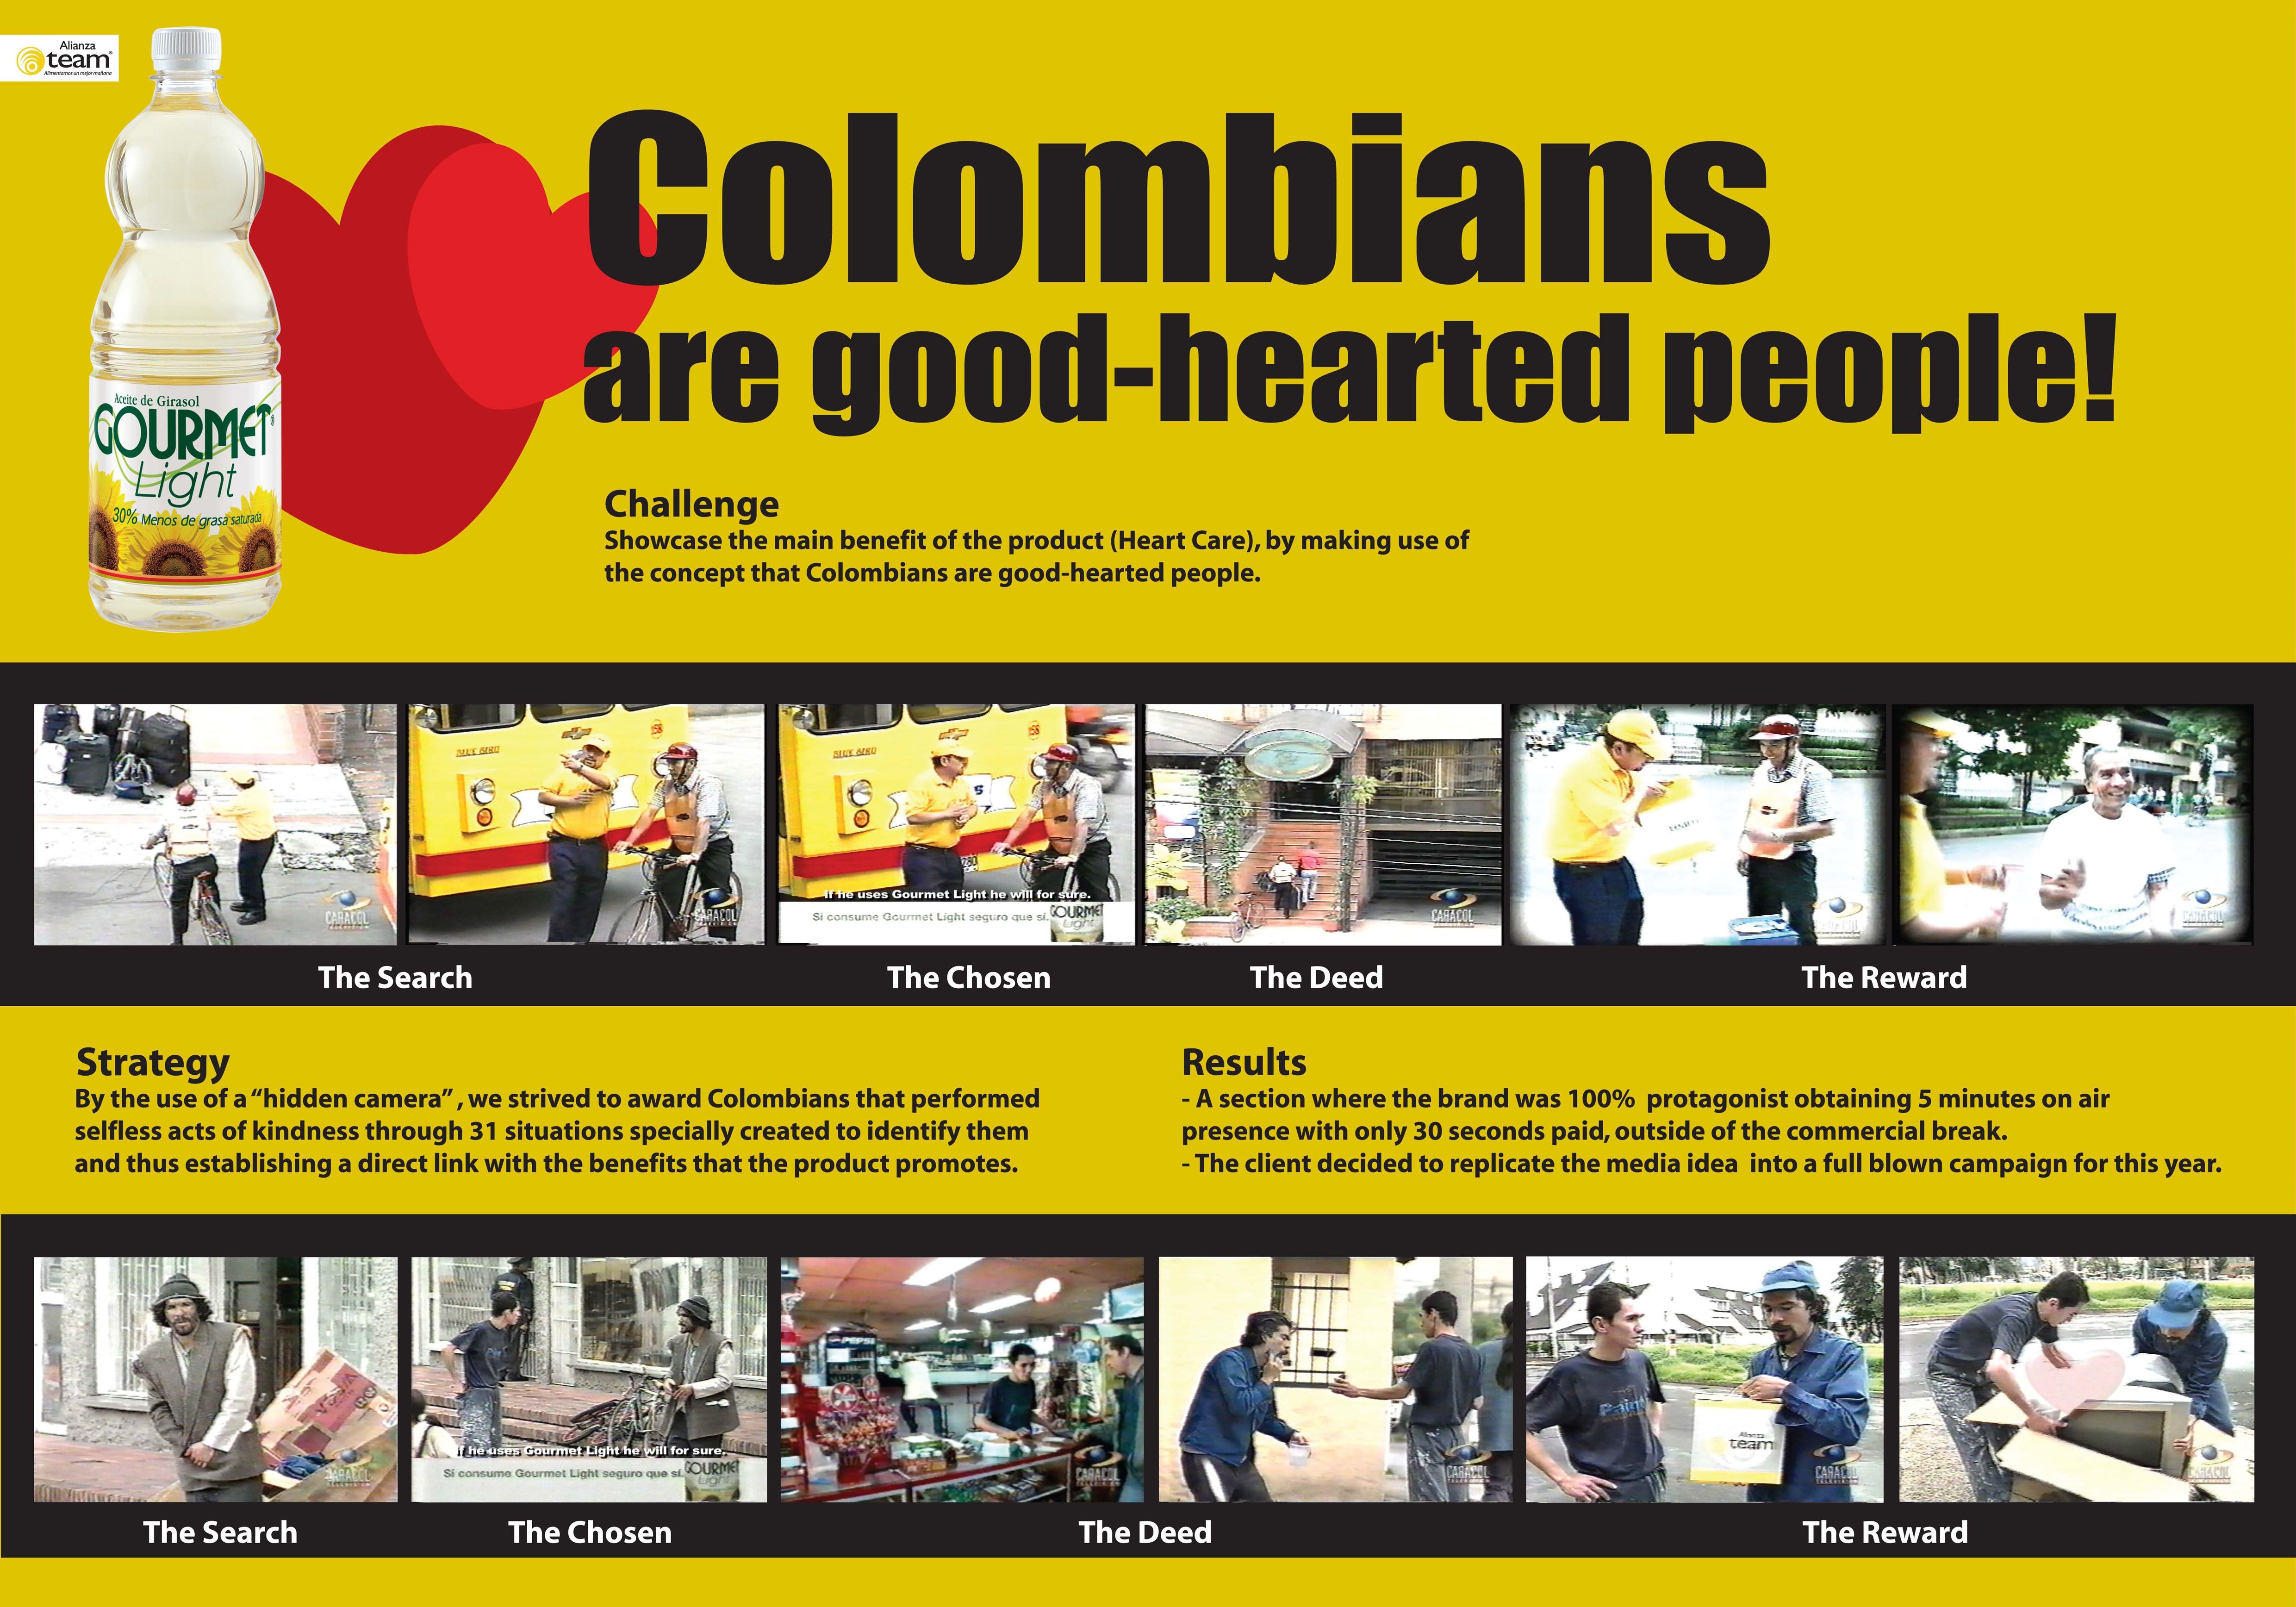 COLOMBIANS ARE GOOD-HEARTED PEOPLE